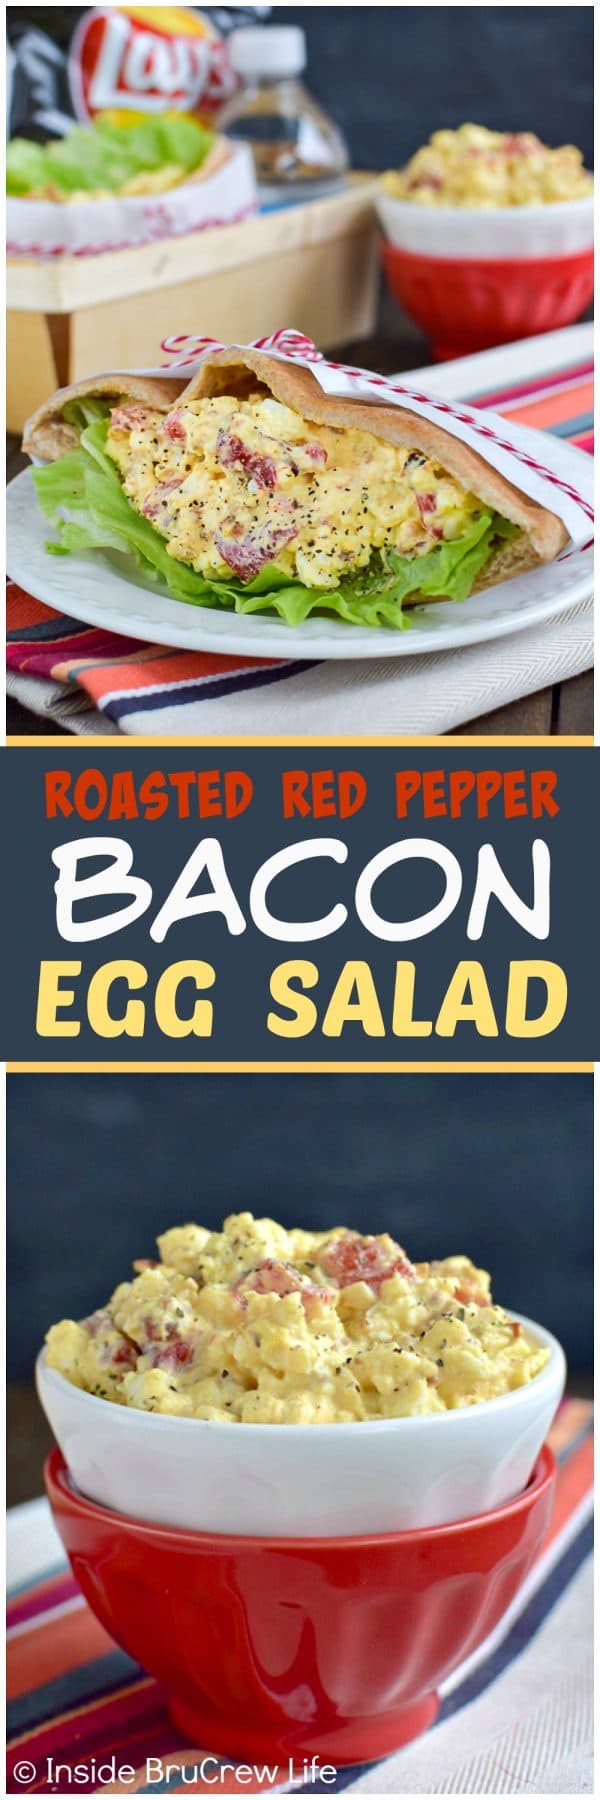 Roasted Red Pepper and Bacon Egg Salad - peppers and bacon add a fun twist to this traditional egg salad. Great recipe to use up those hard boiled eggs!